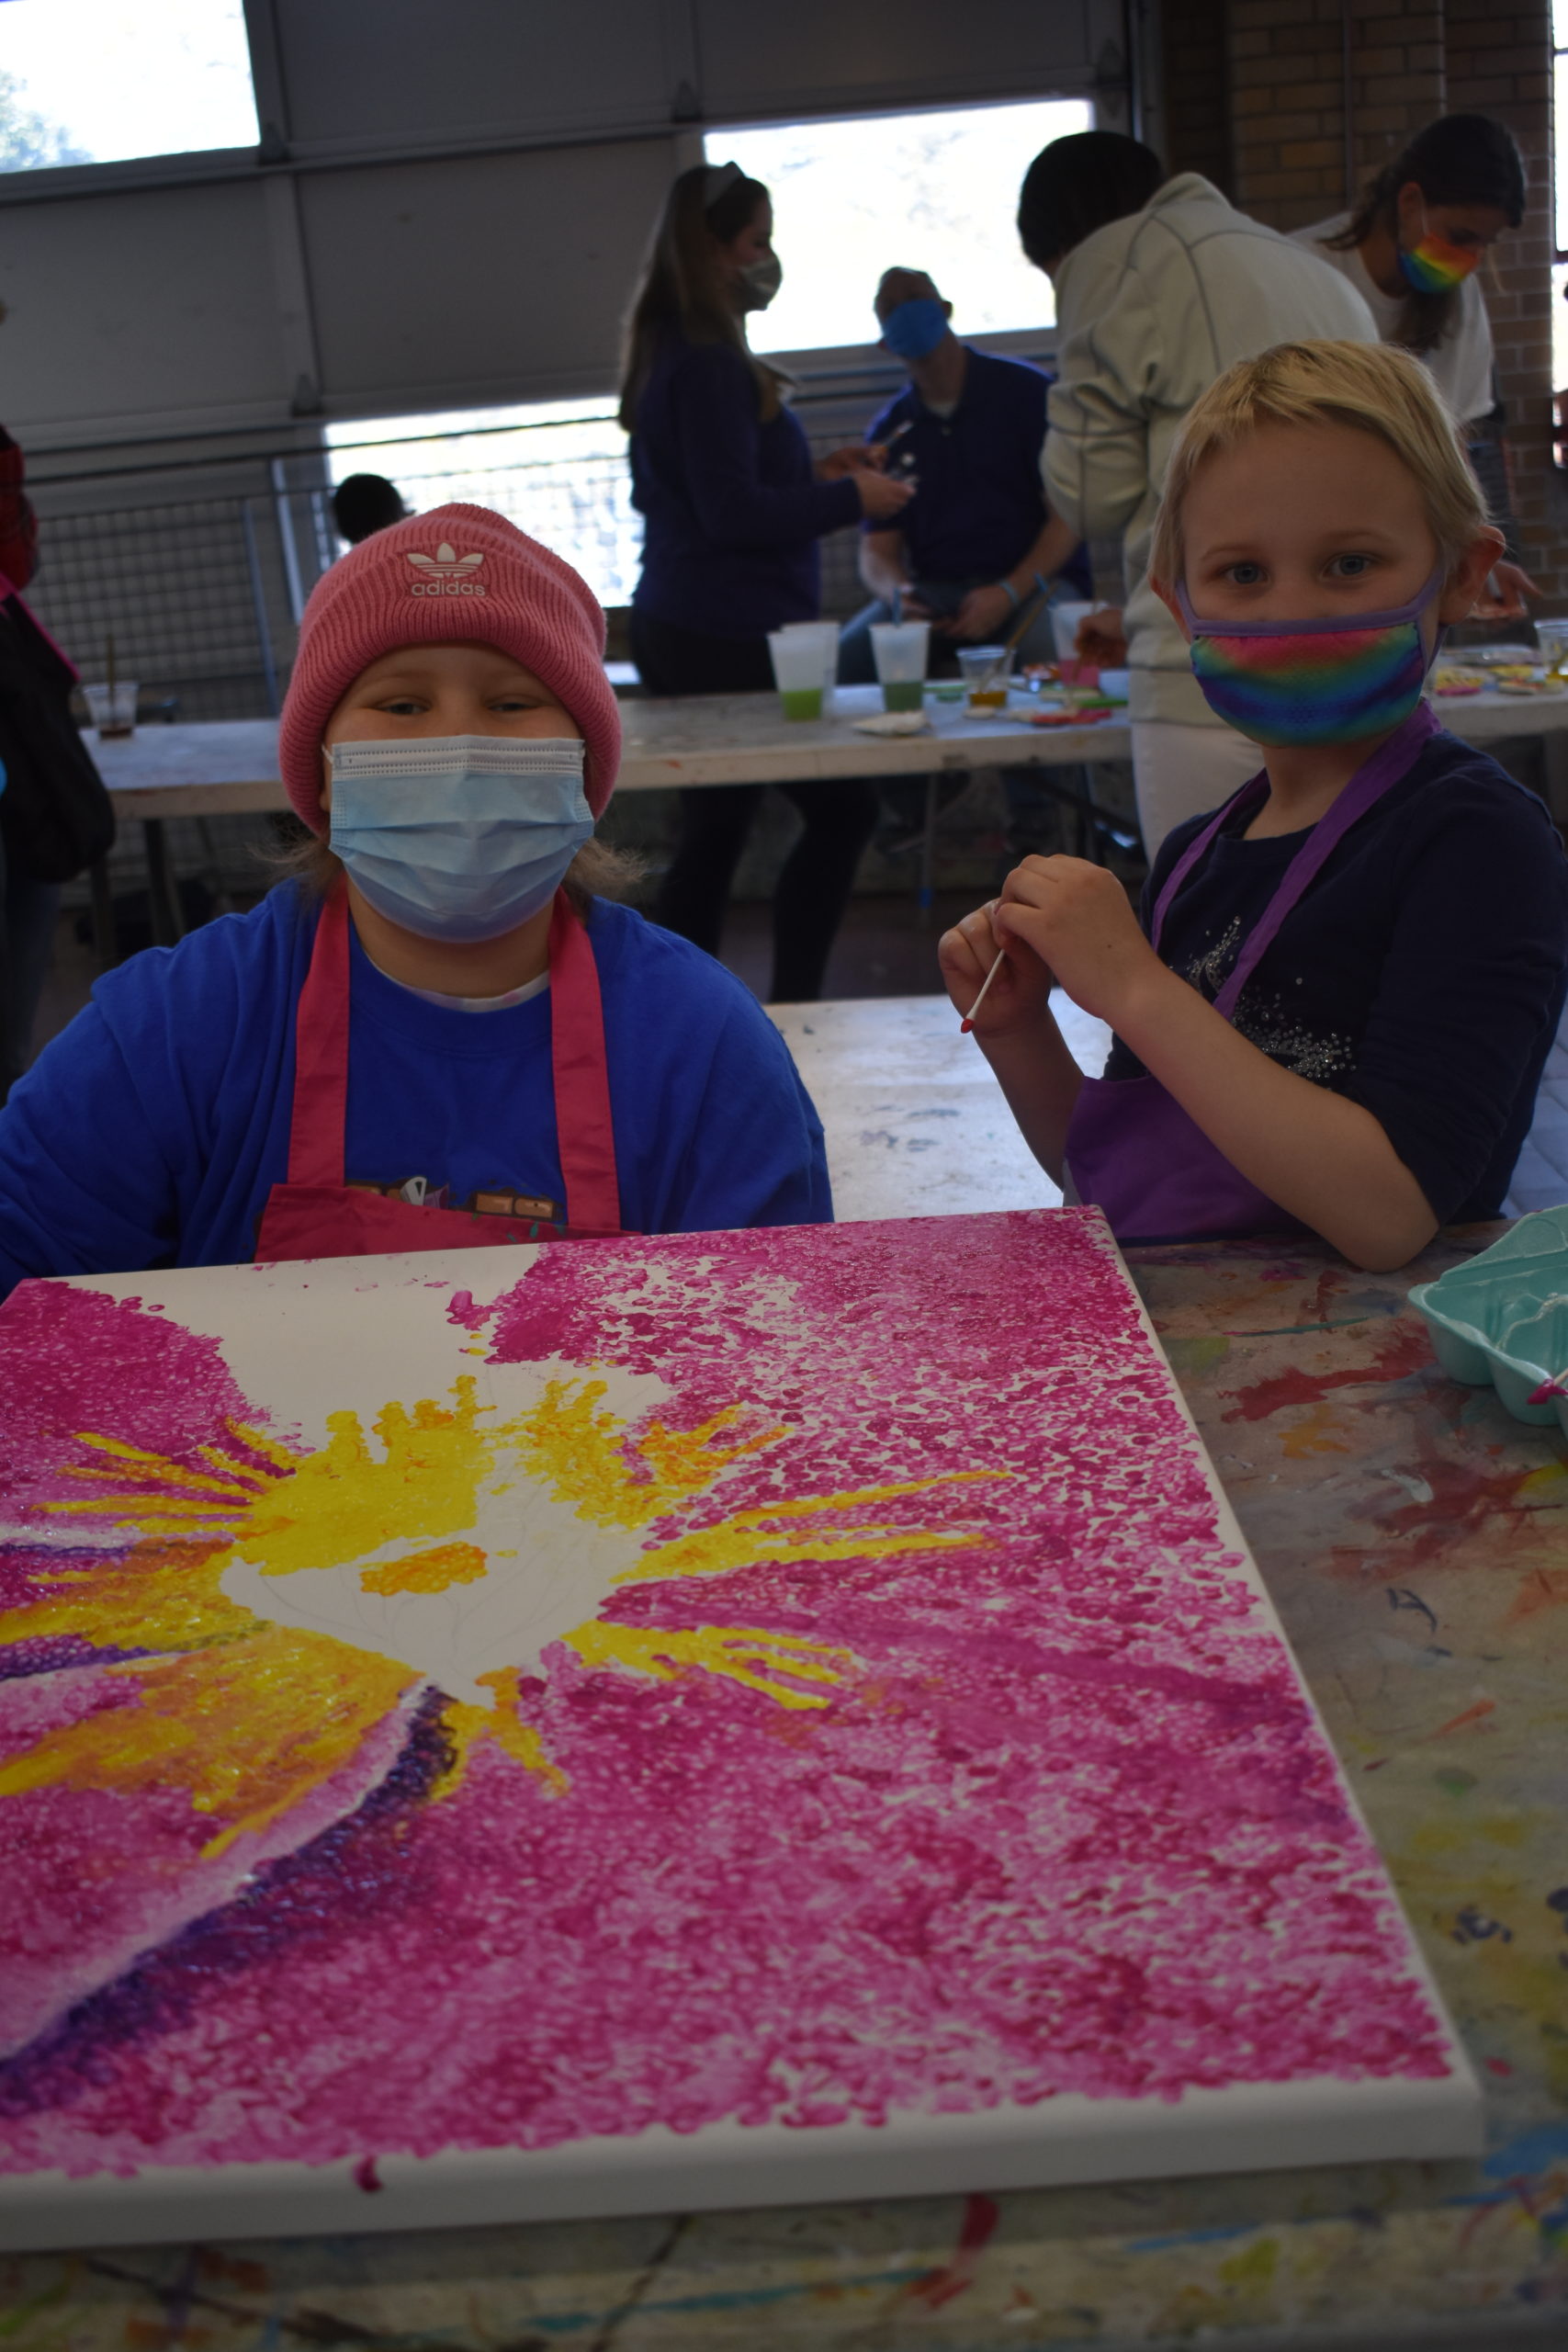 Two children are showing their painting of a large pink flower